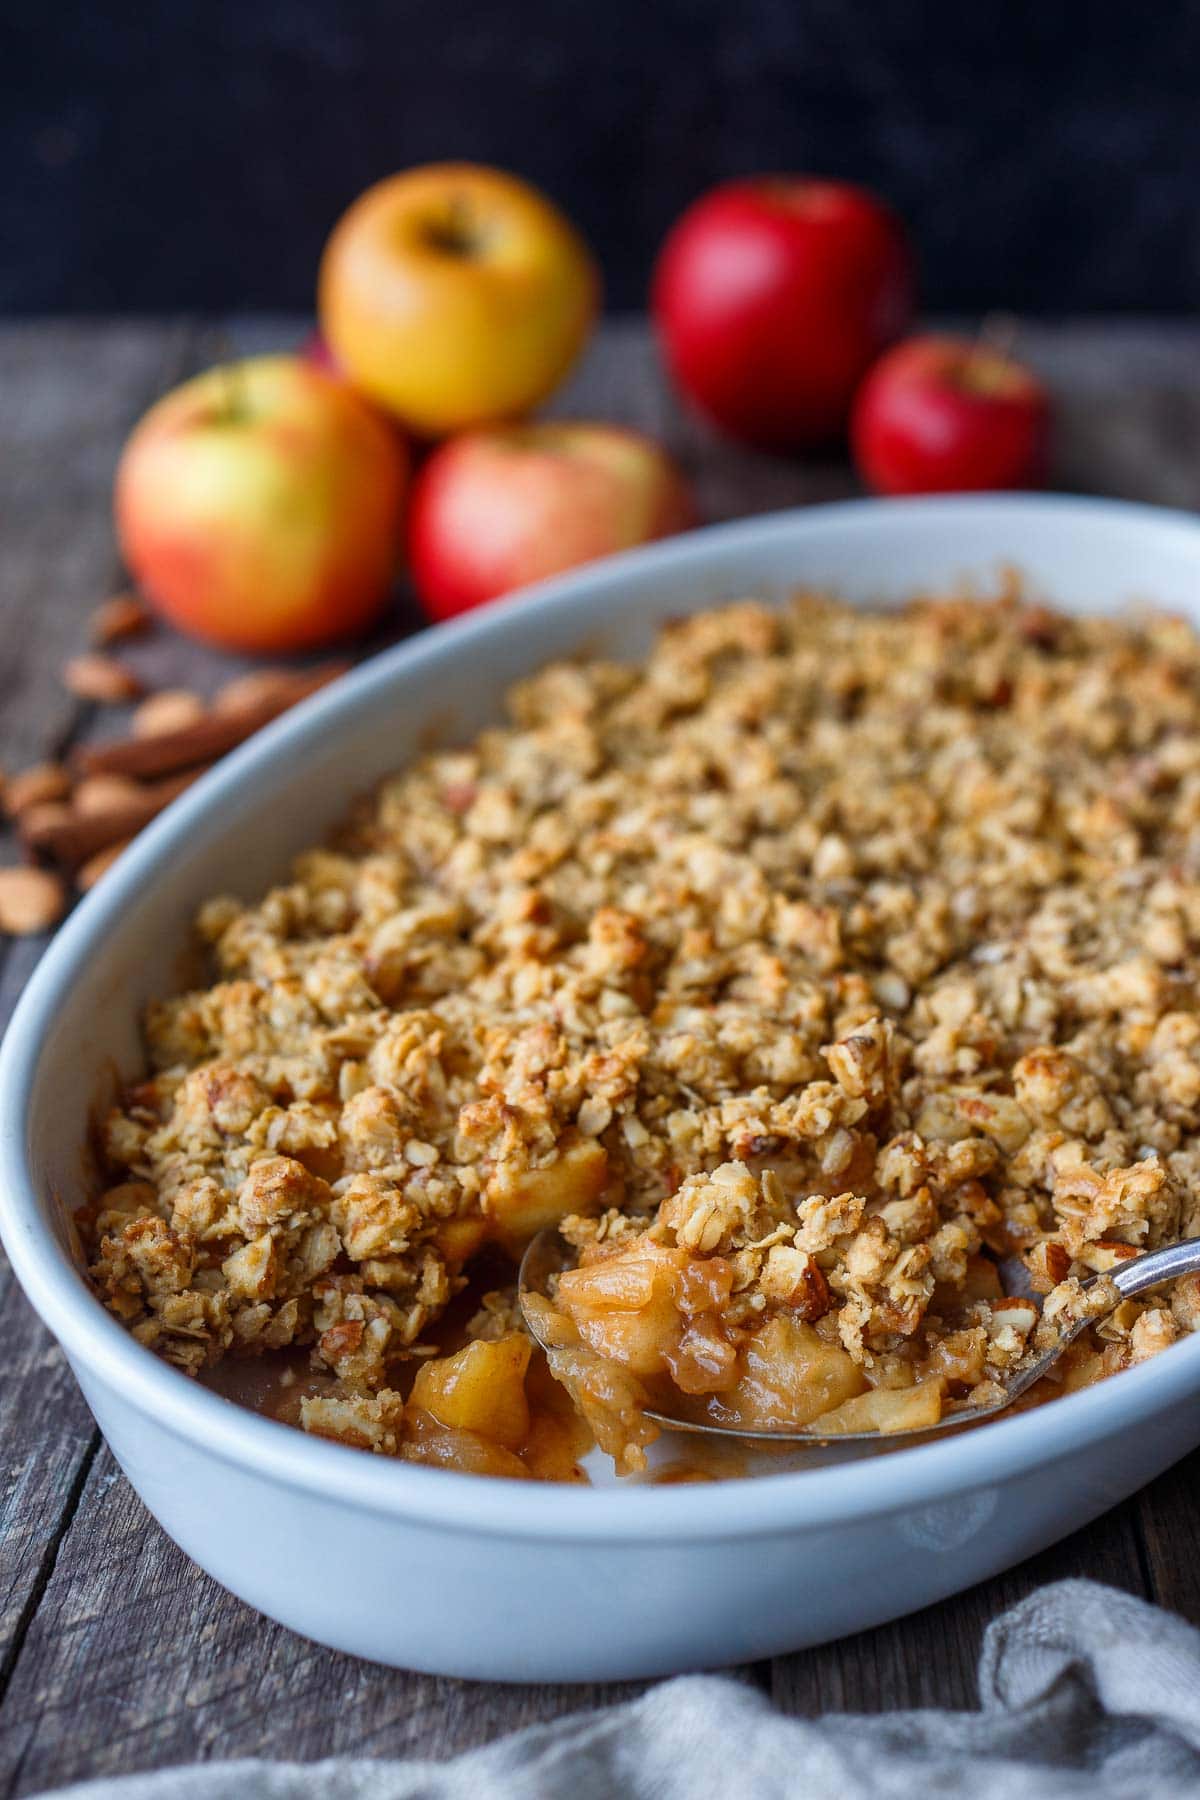 spoonful of apple crisp from dish with cinnamon baked apples topped with oat almond topping